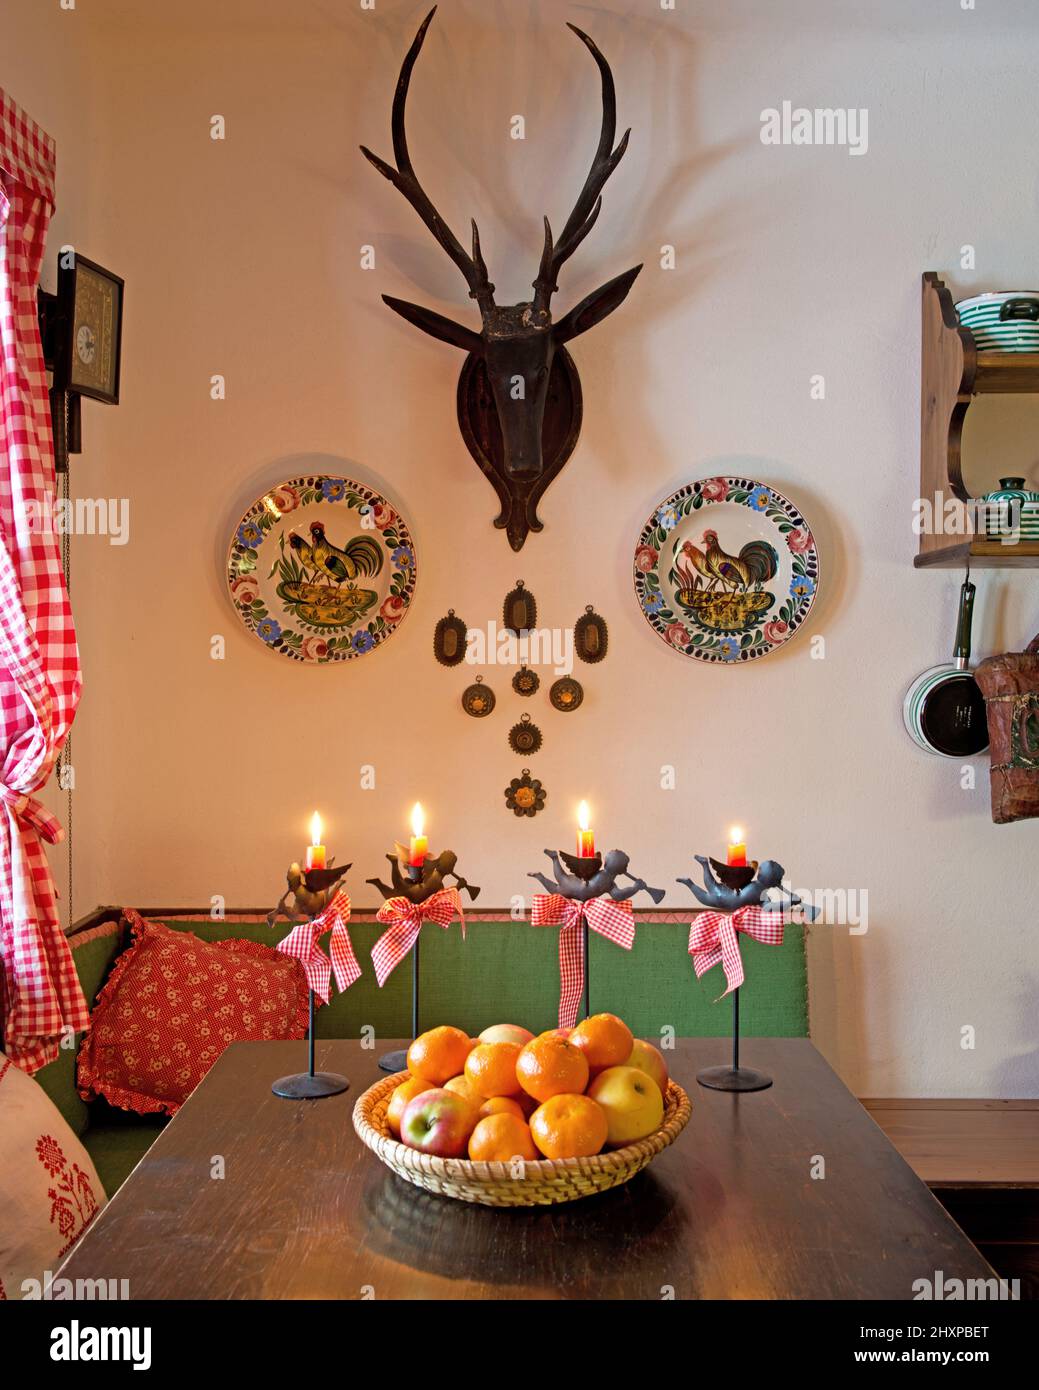 country kitchen with table decorated with Christmas candles and basket with fruits, bench with cushions, antler and plated on the wall Stock Photo